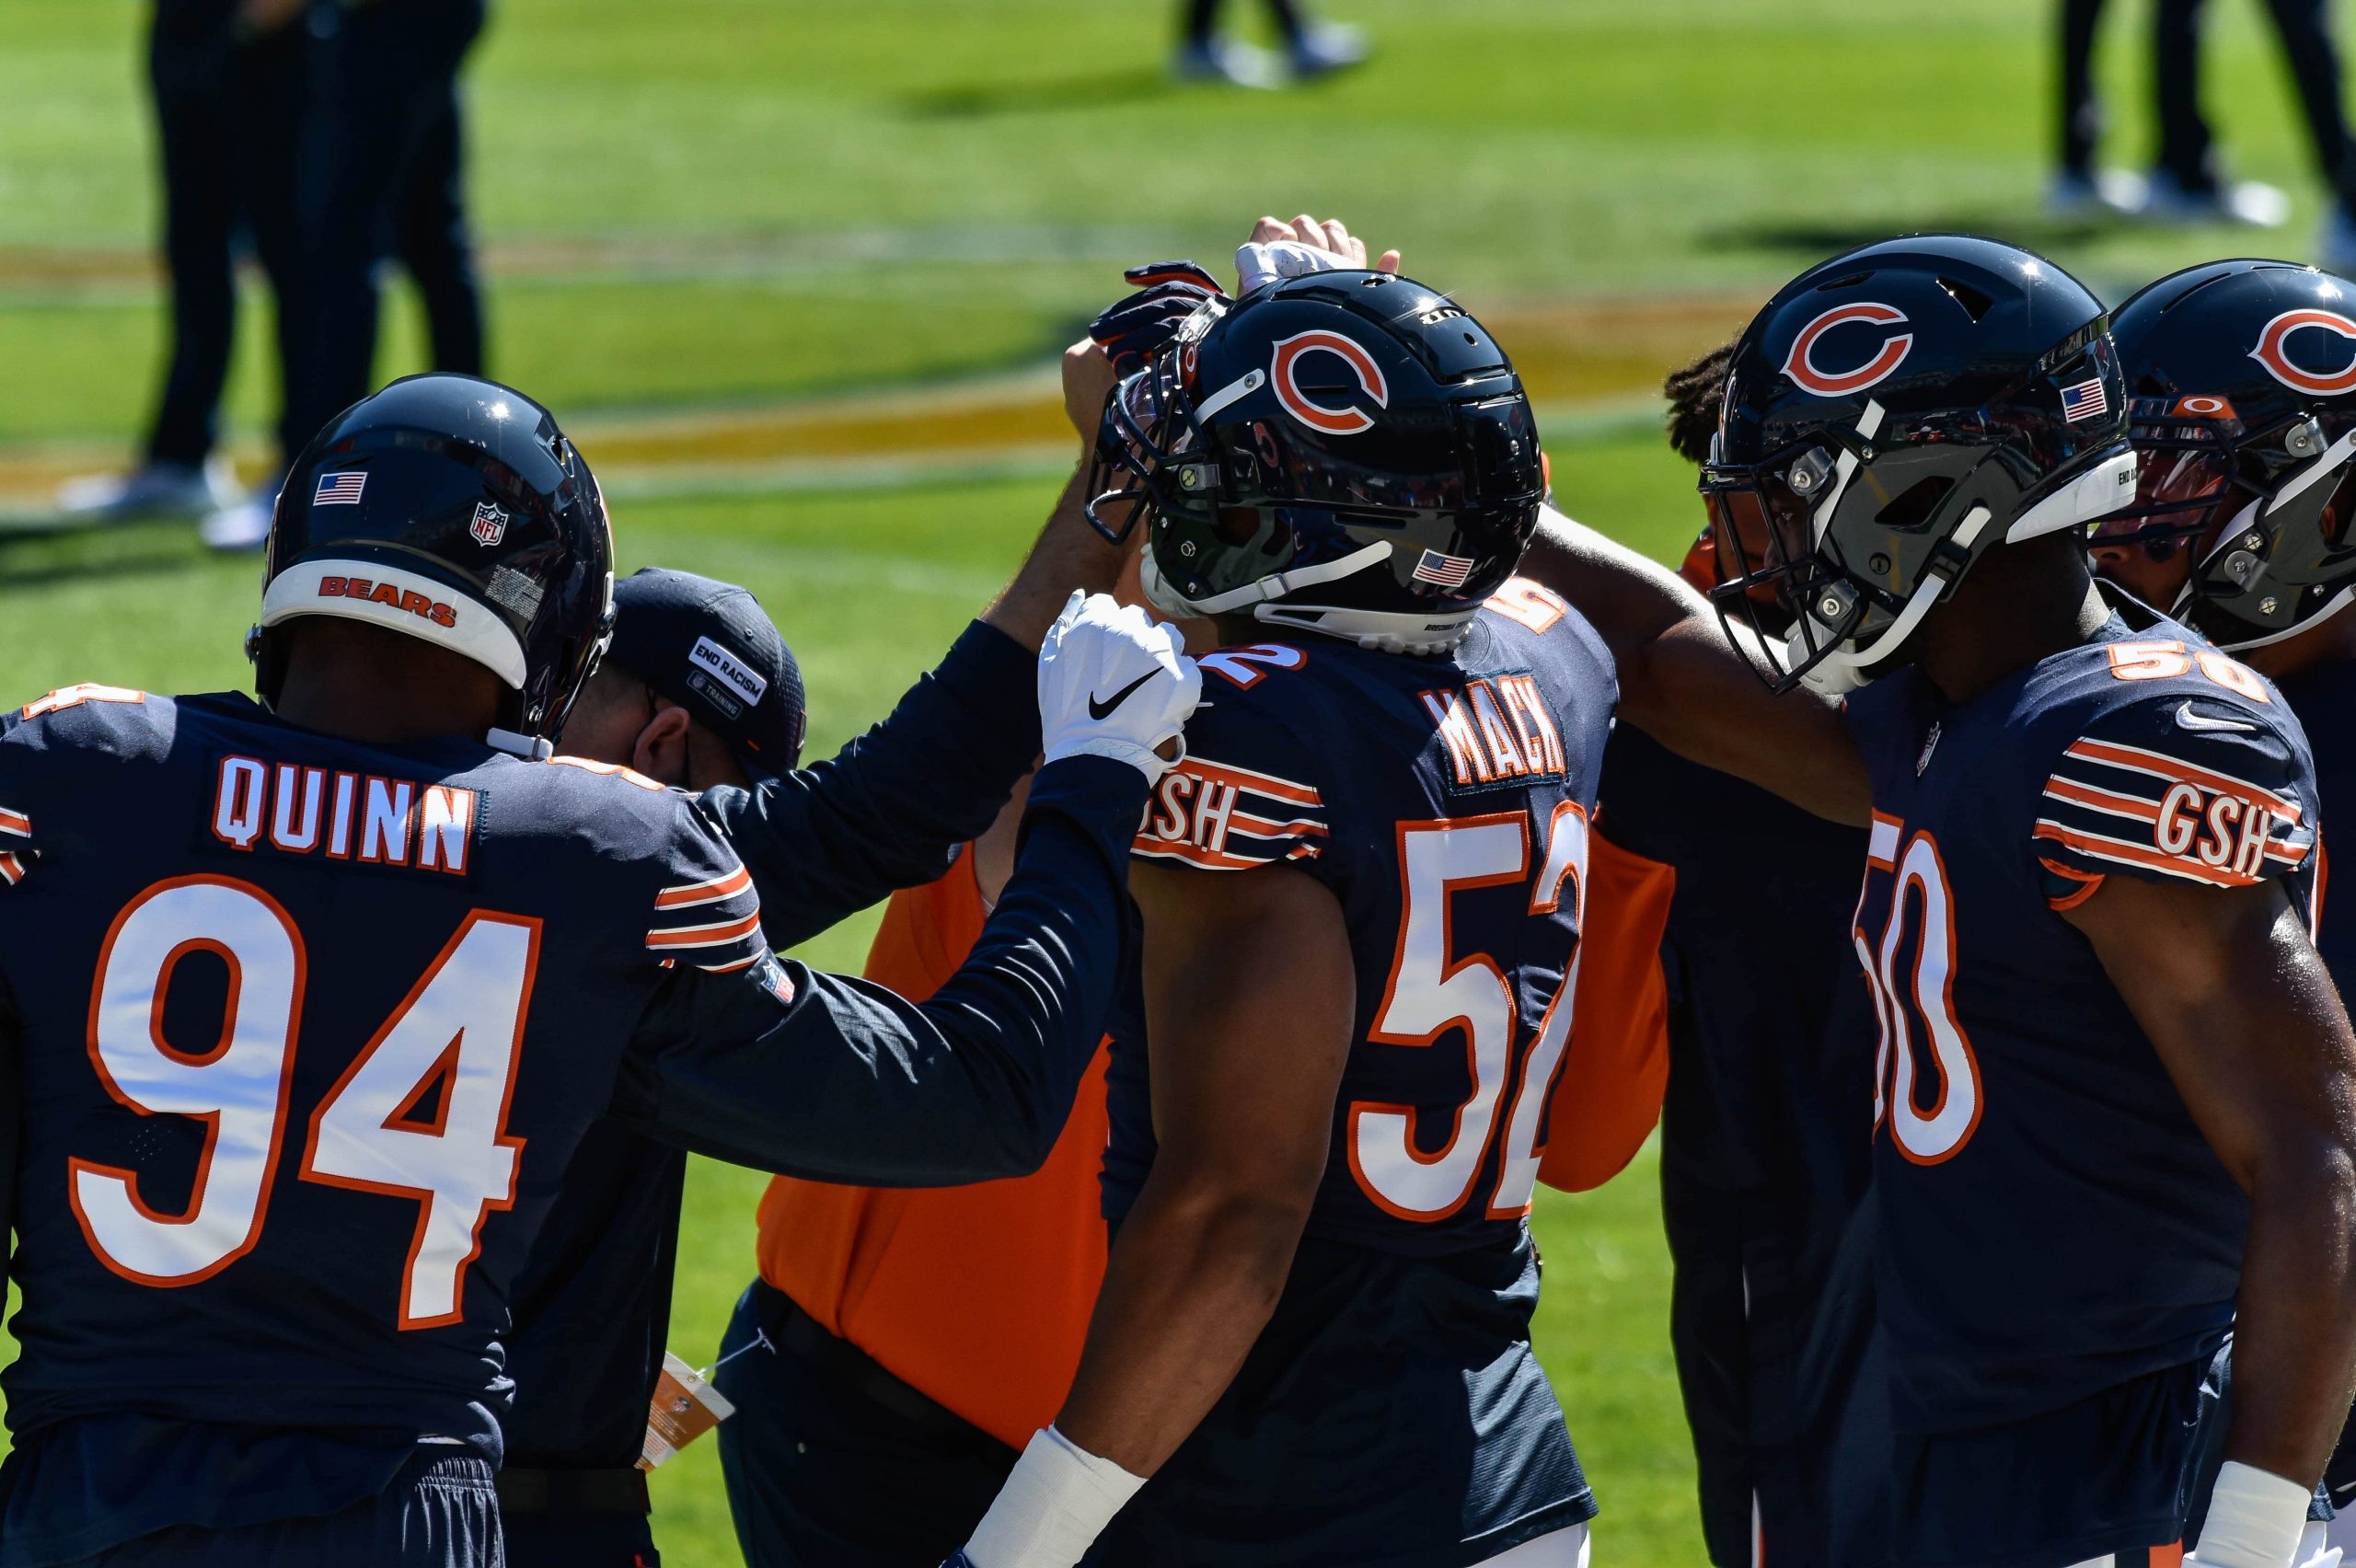 Khalil Mack and other members of the Chicago Bears